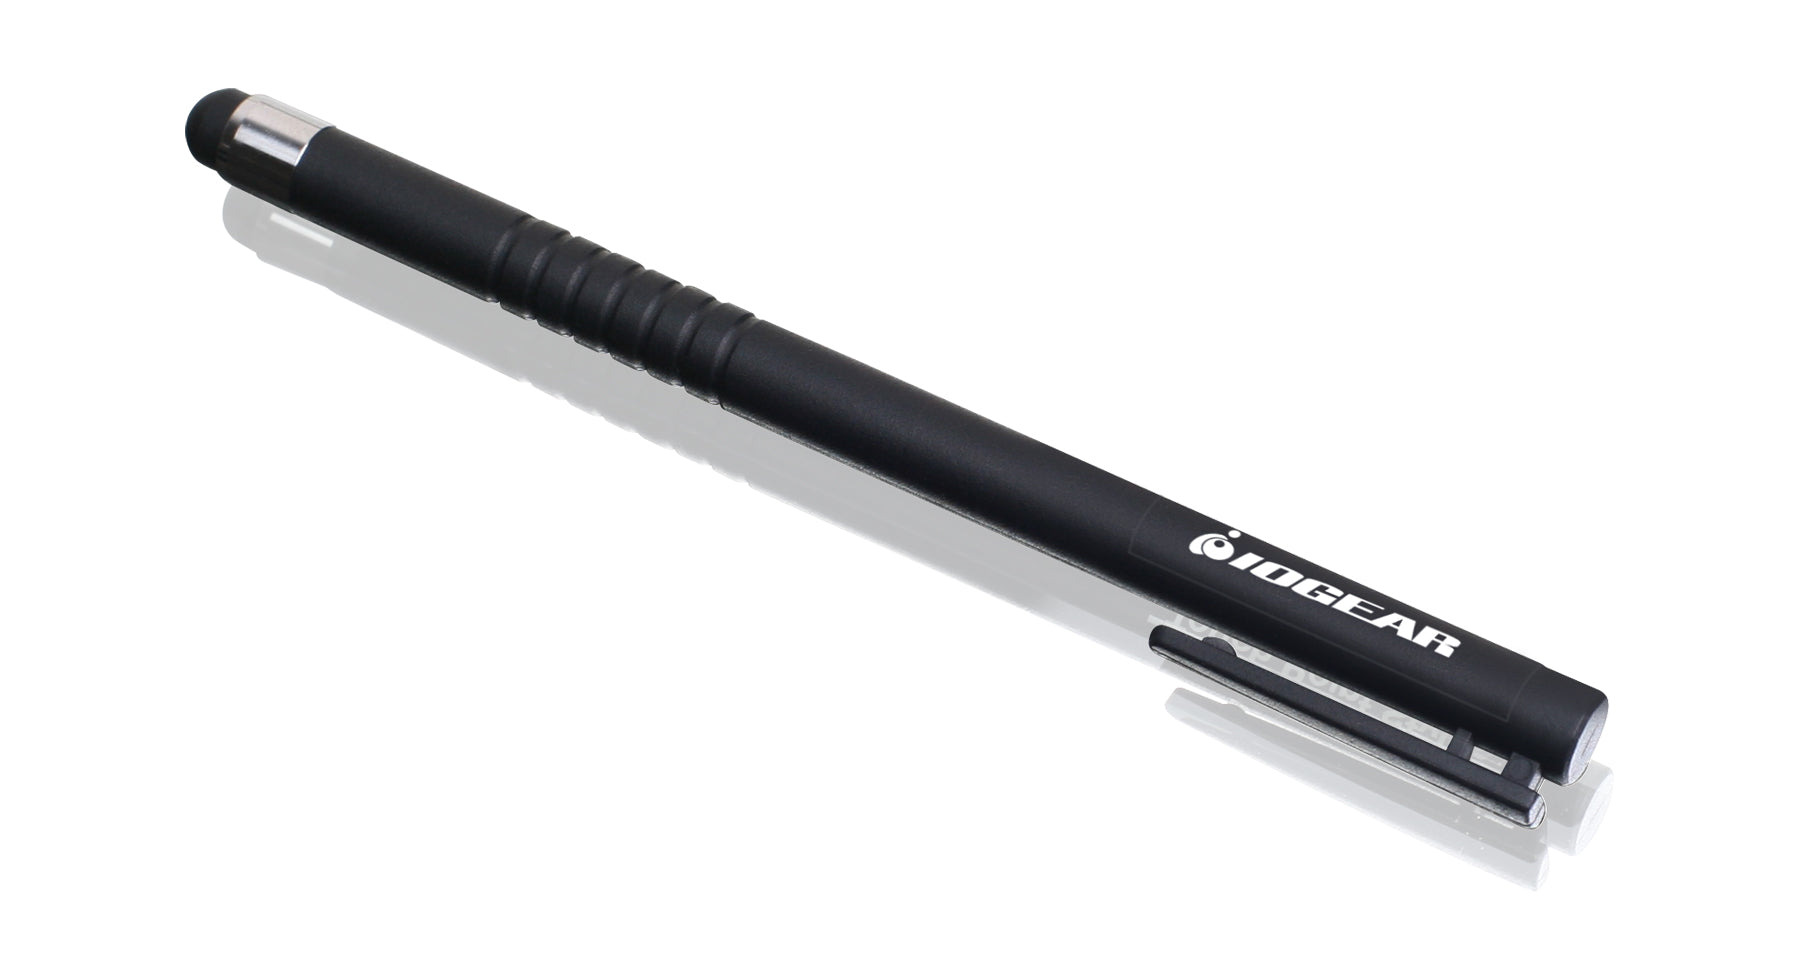 Touch Point Stylus for Tablets and Smartphones